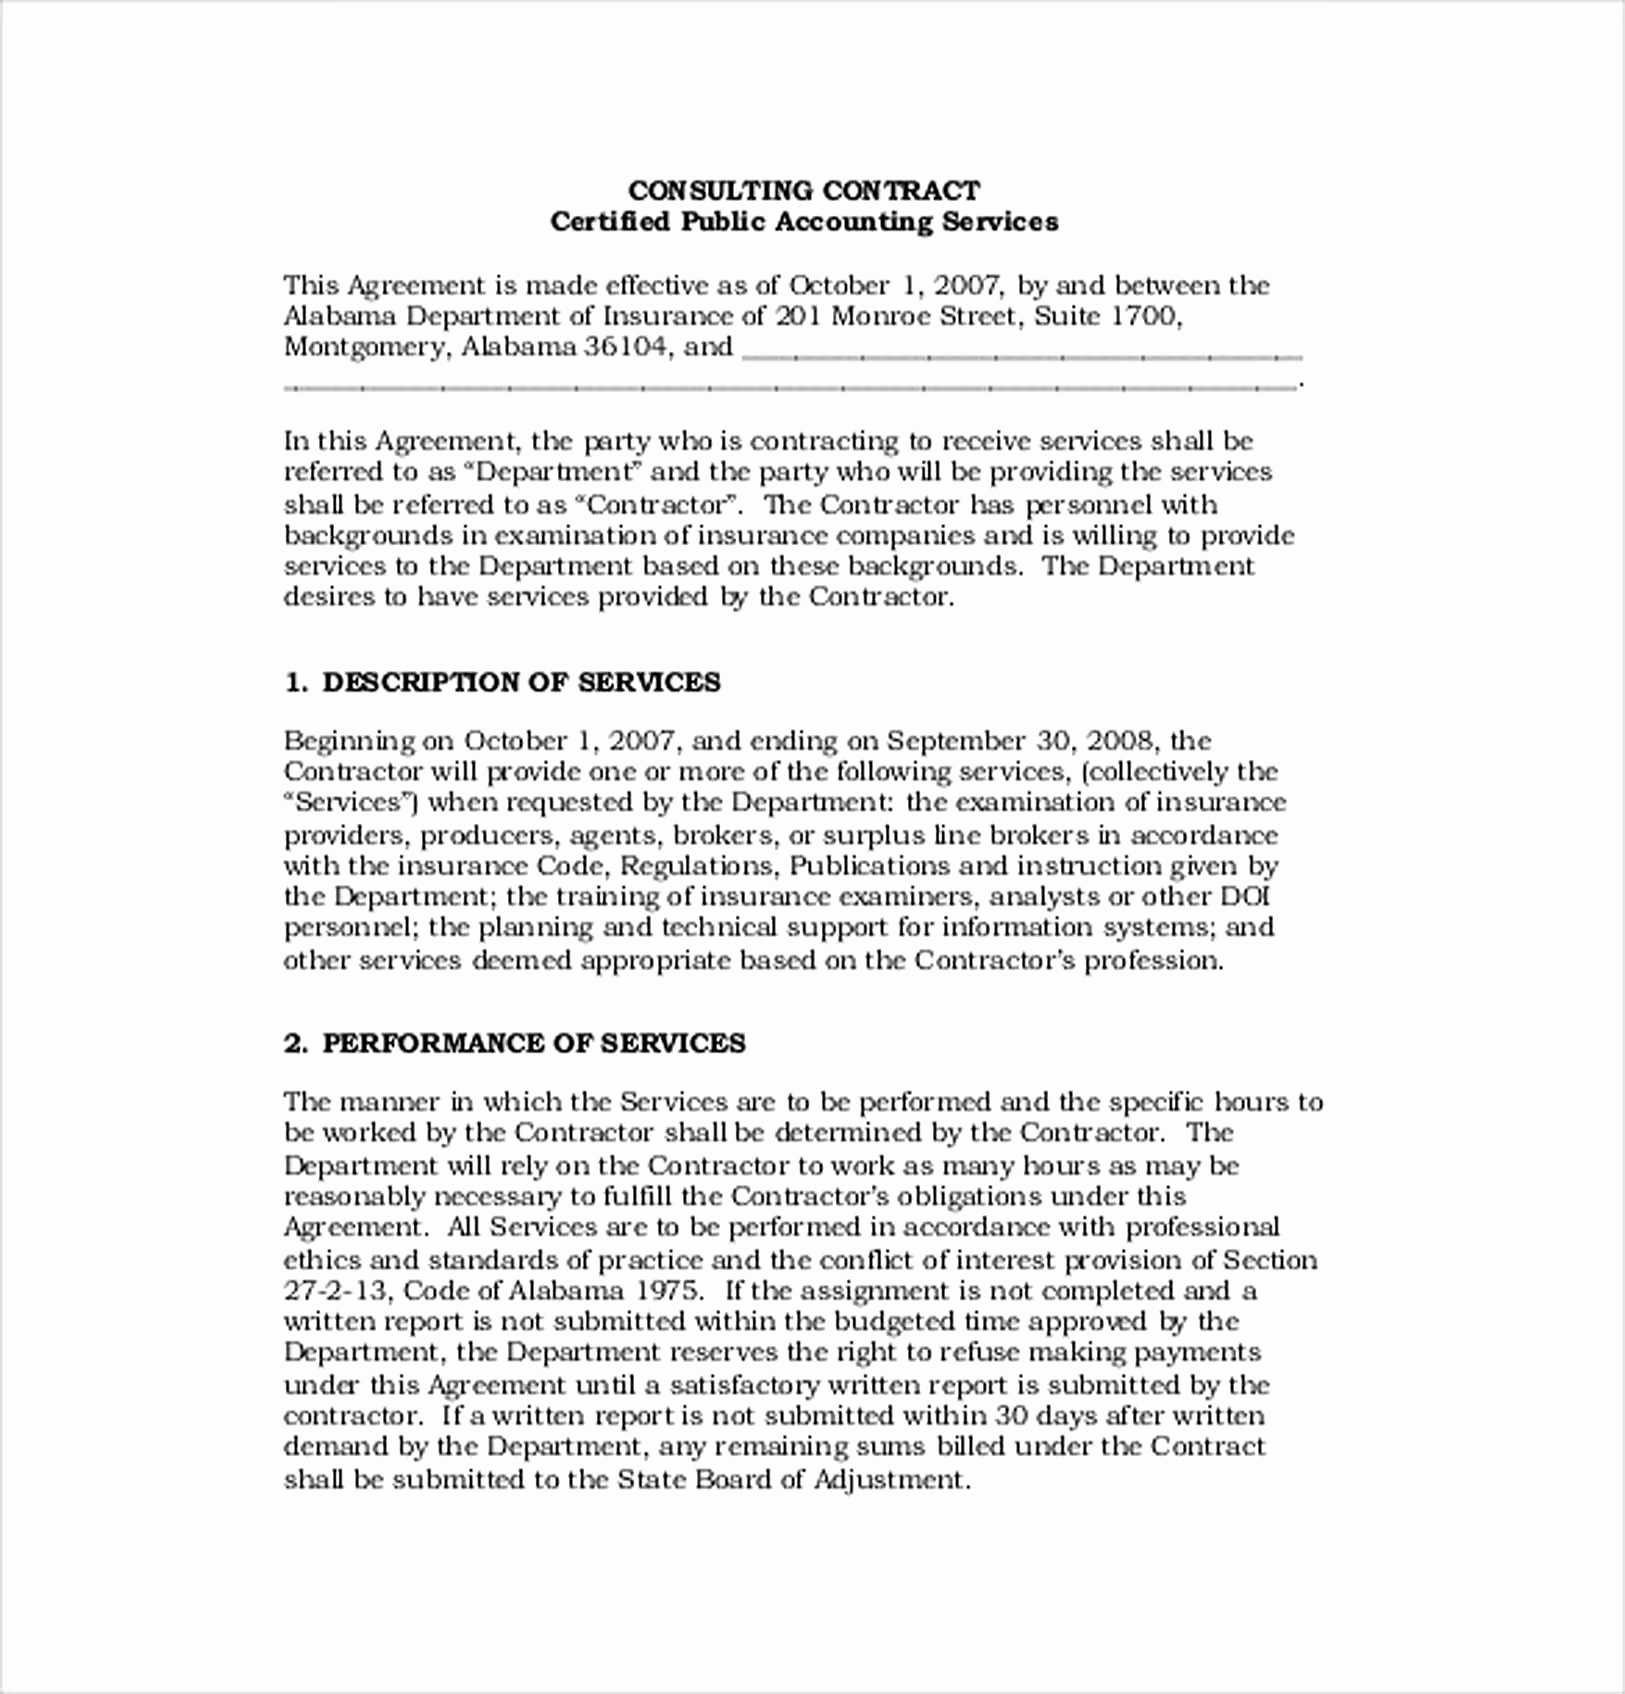 Simple Consulting Agreement Template Lovely Free Consulting Contract Agreement Template 9